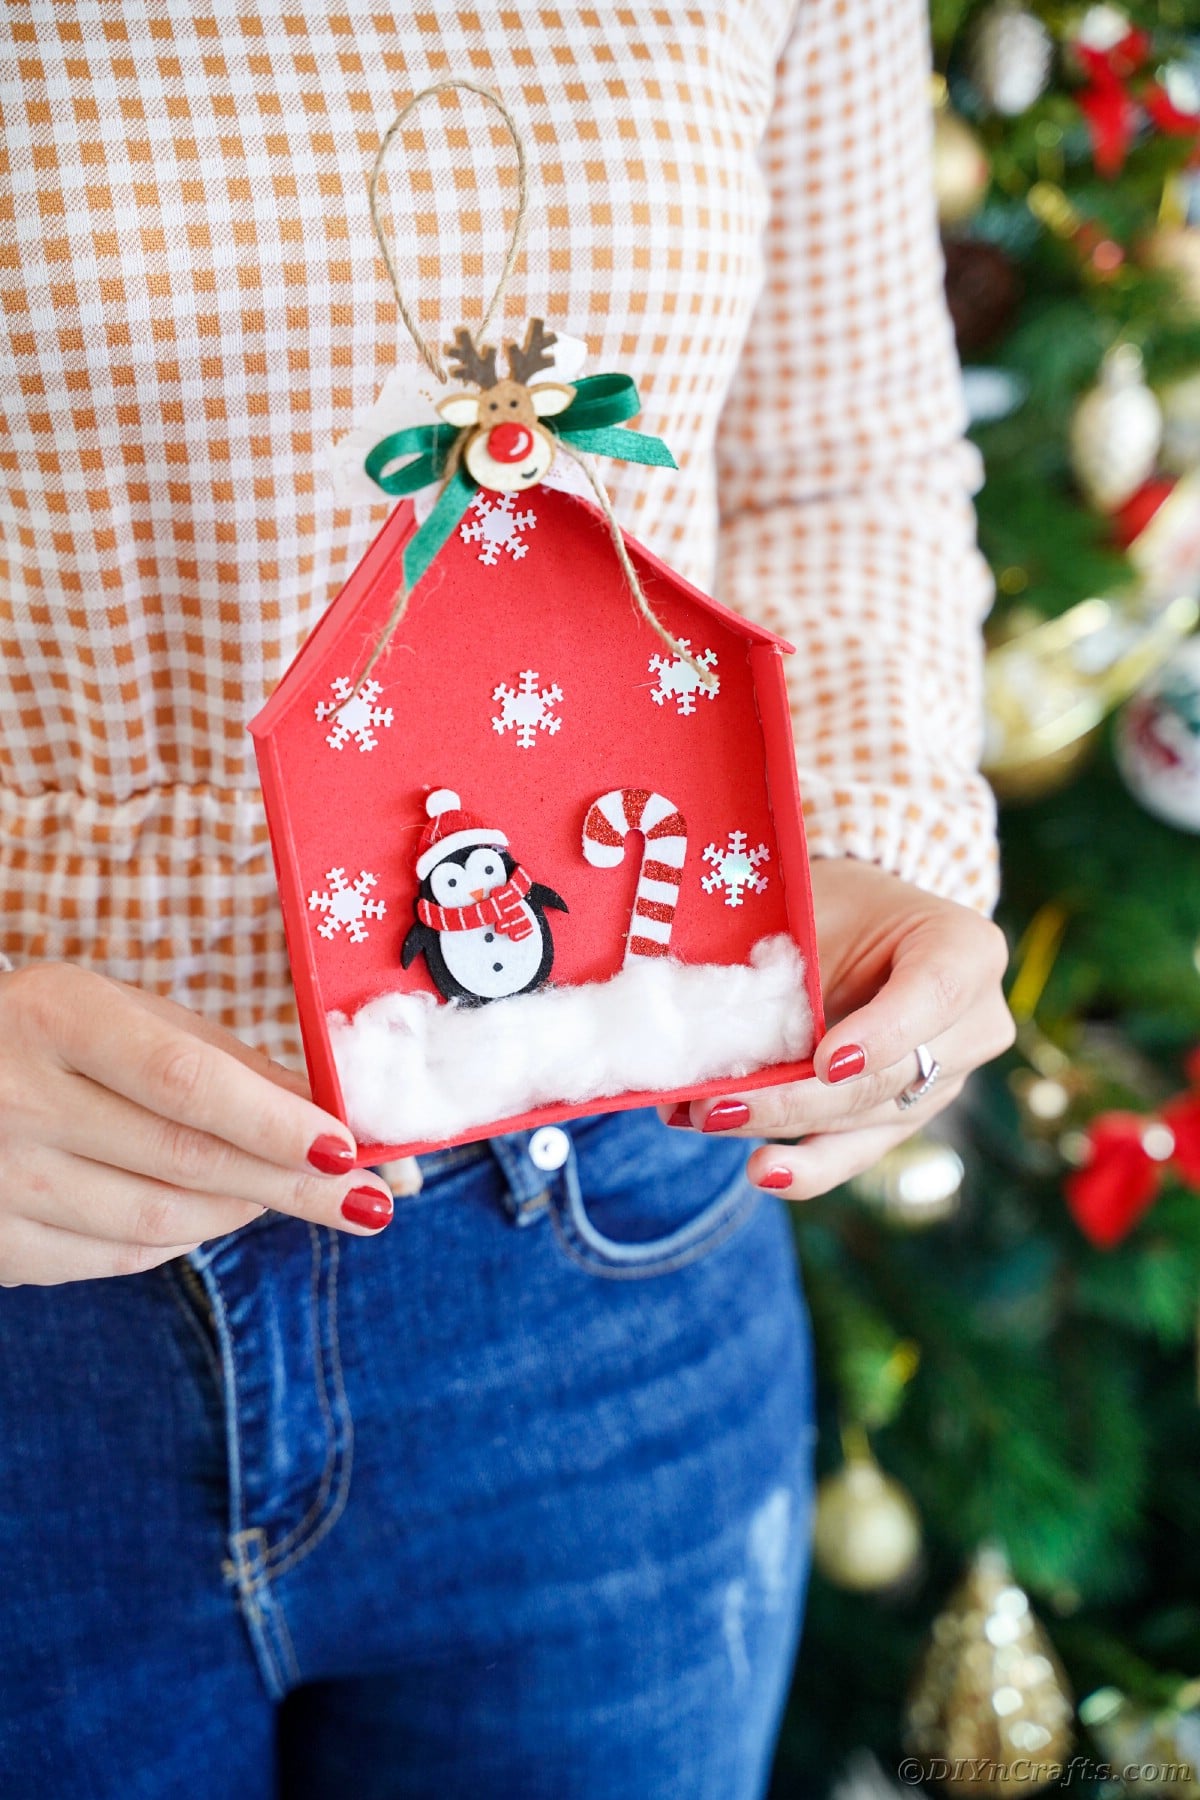 red penguin house ornament being held by woman wearing jeans